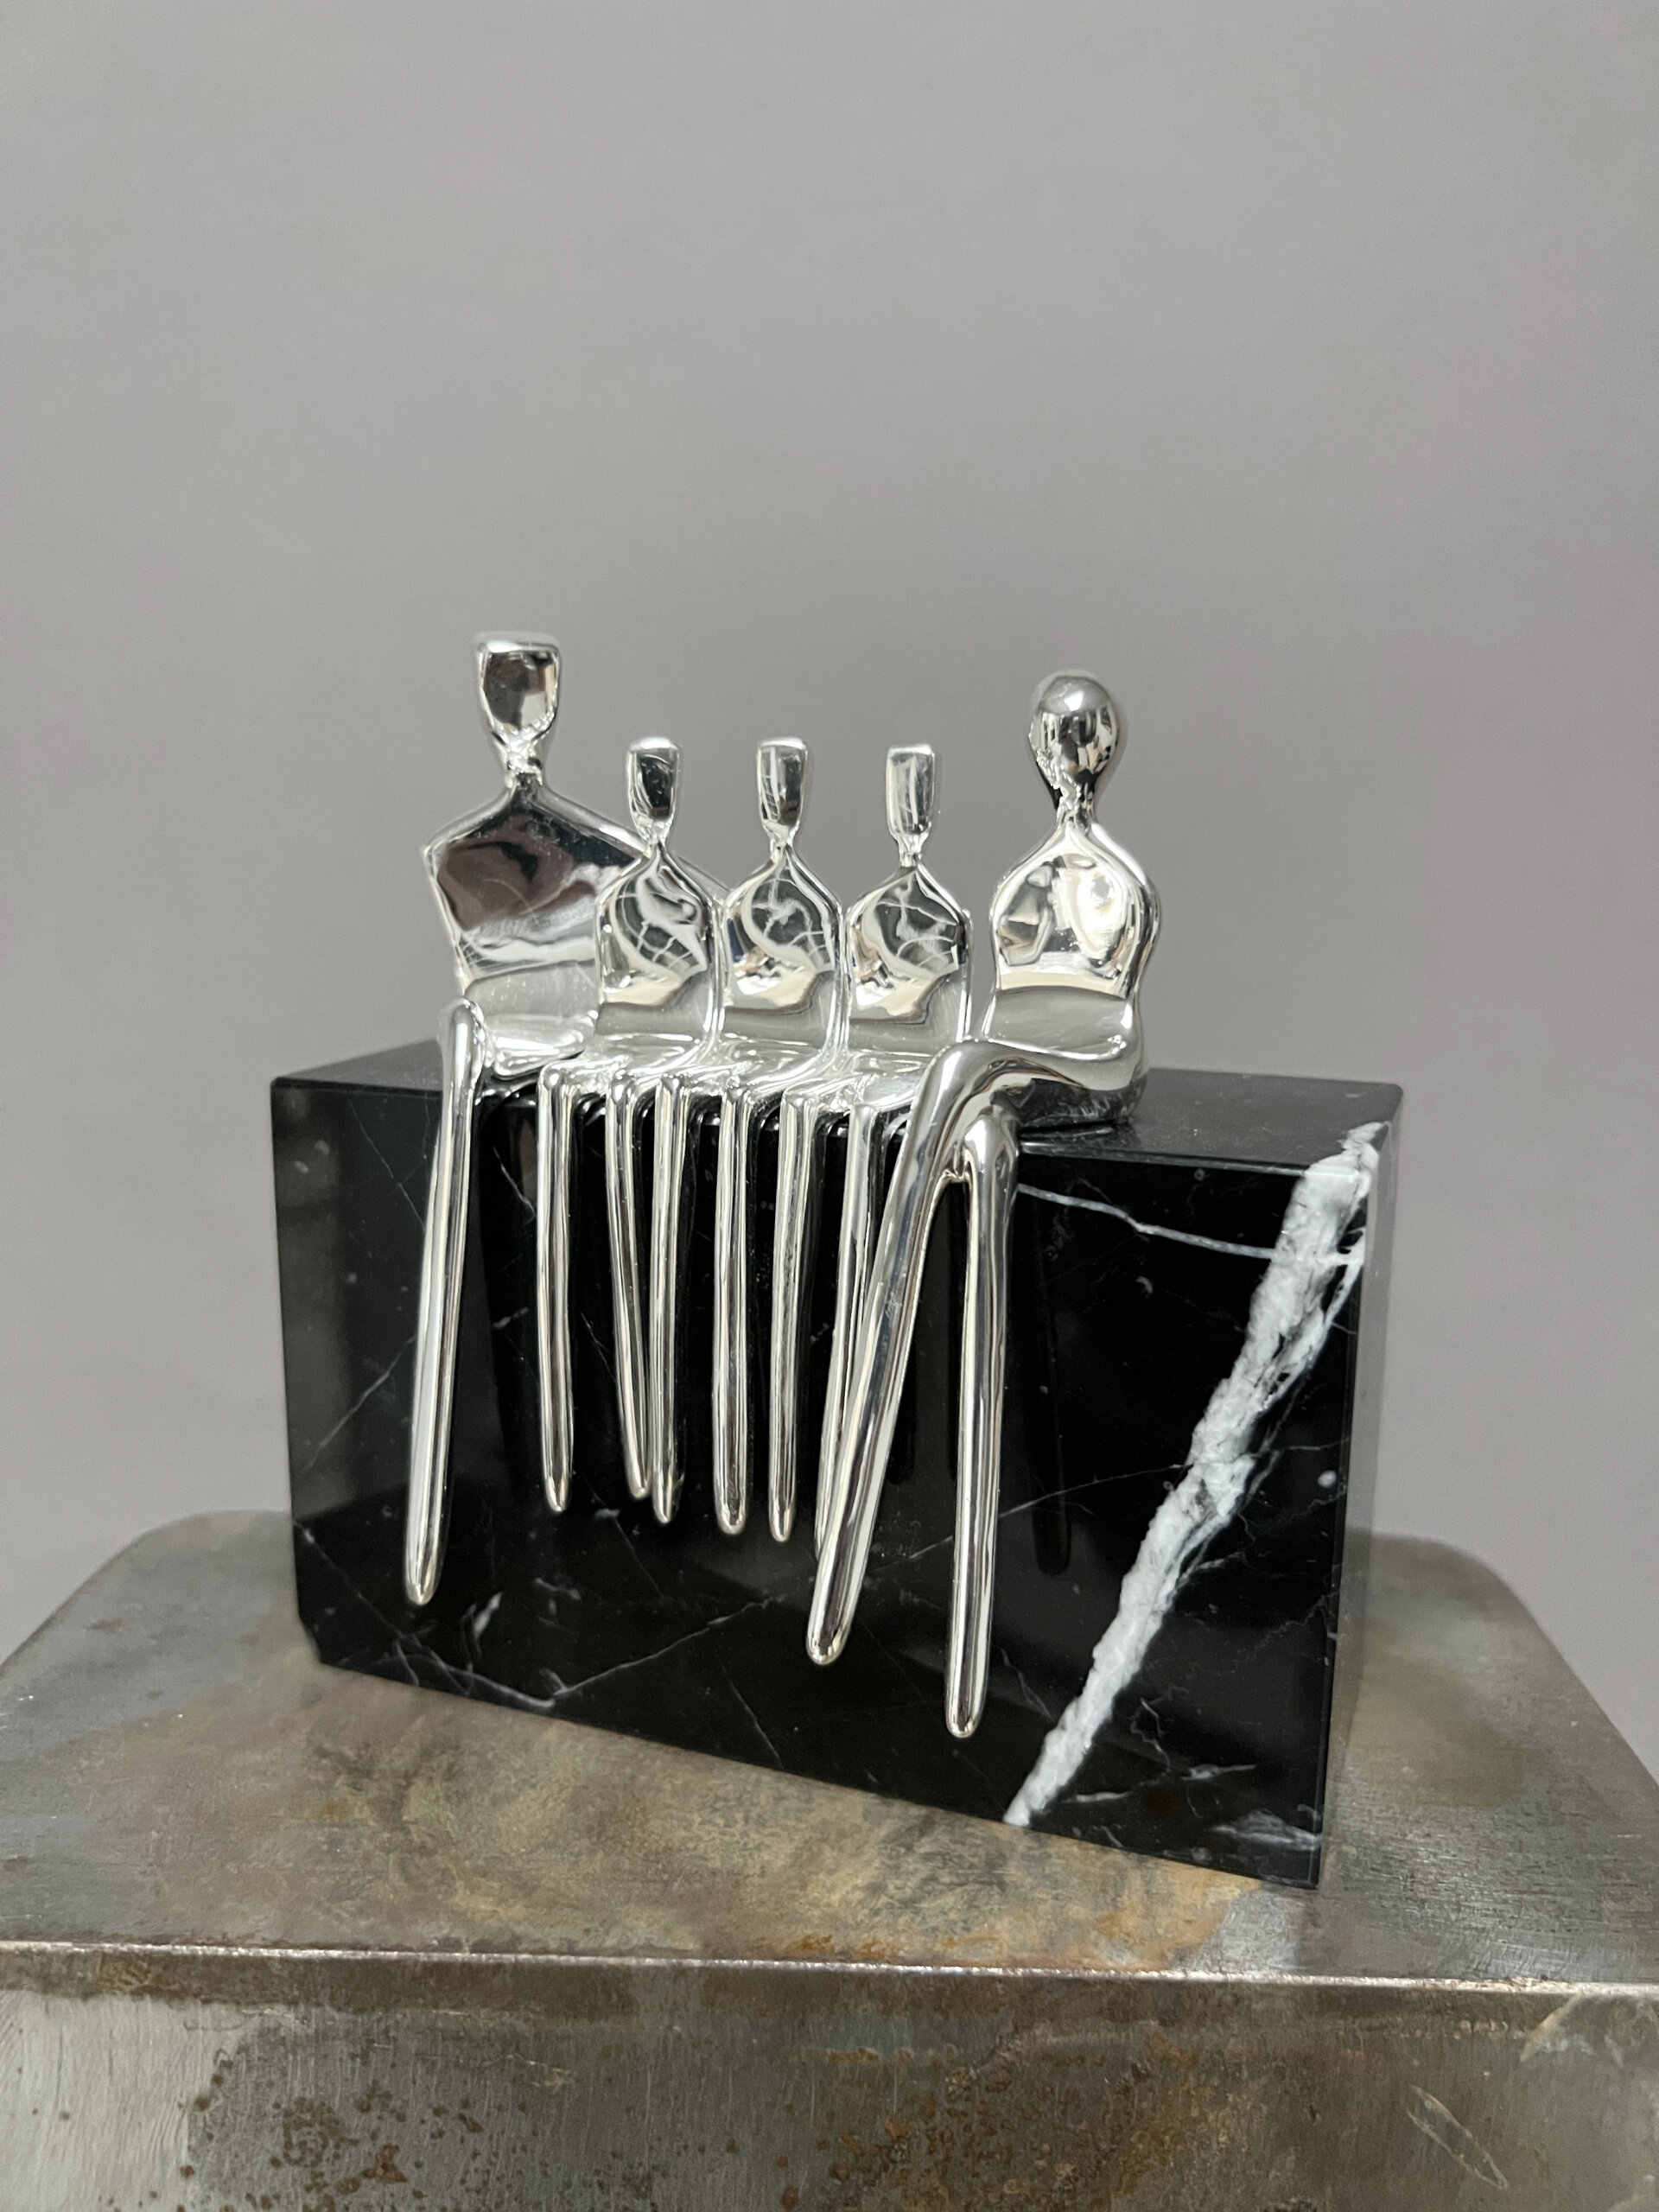 Studio sale, Family of 5 with 3 boys, silver plated